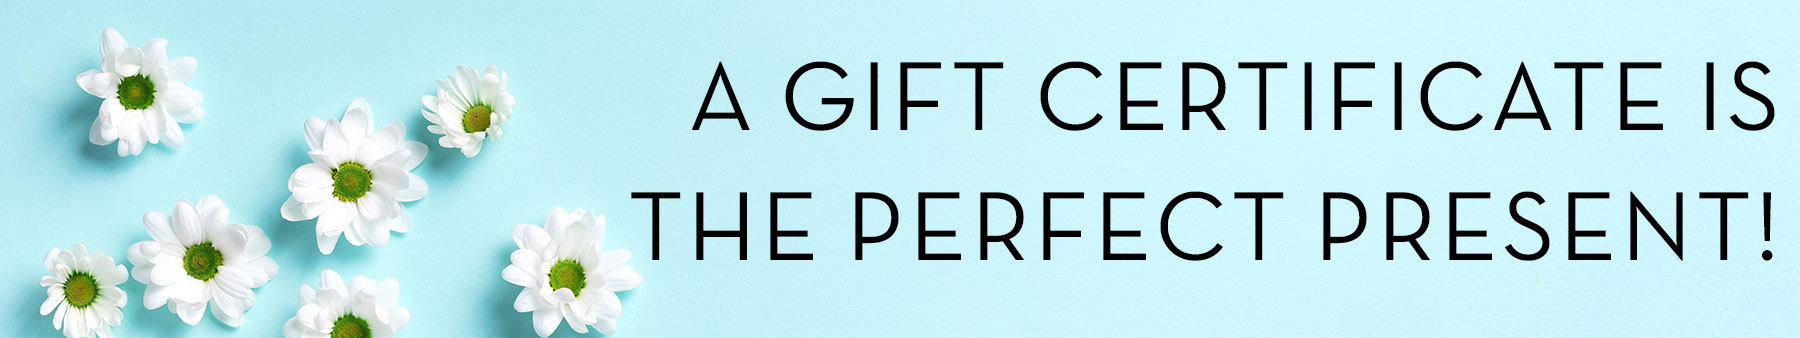 a gift certificate is always the perfect present